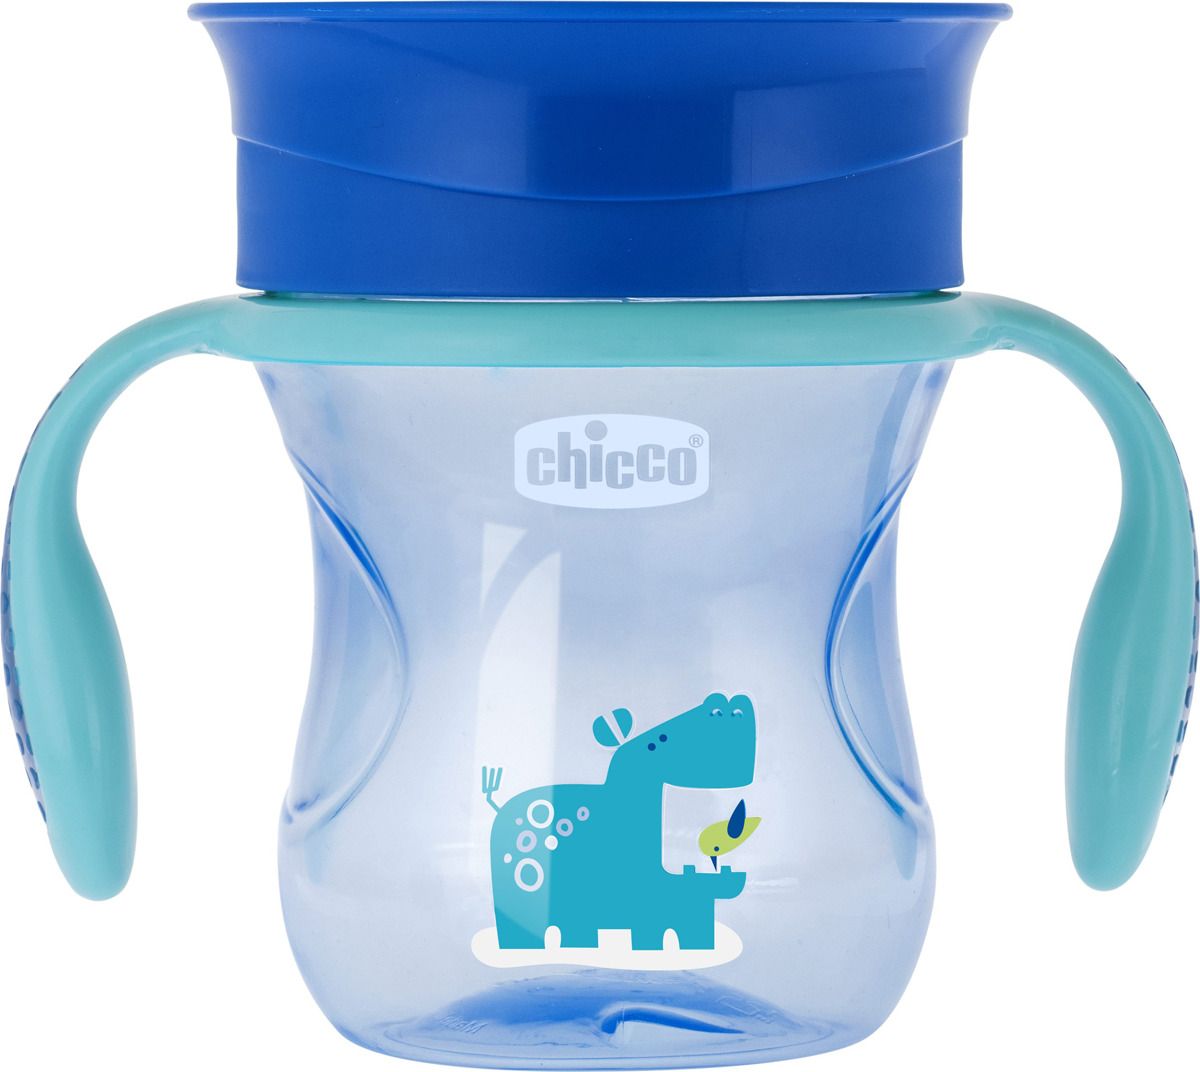 - Chicco Perfect Cup,  , 200 